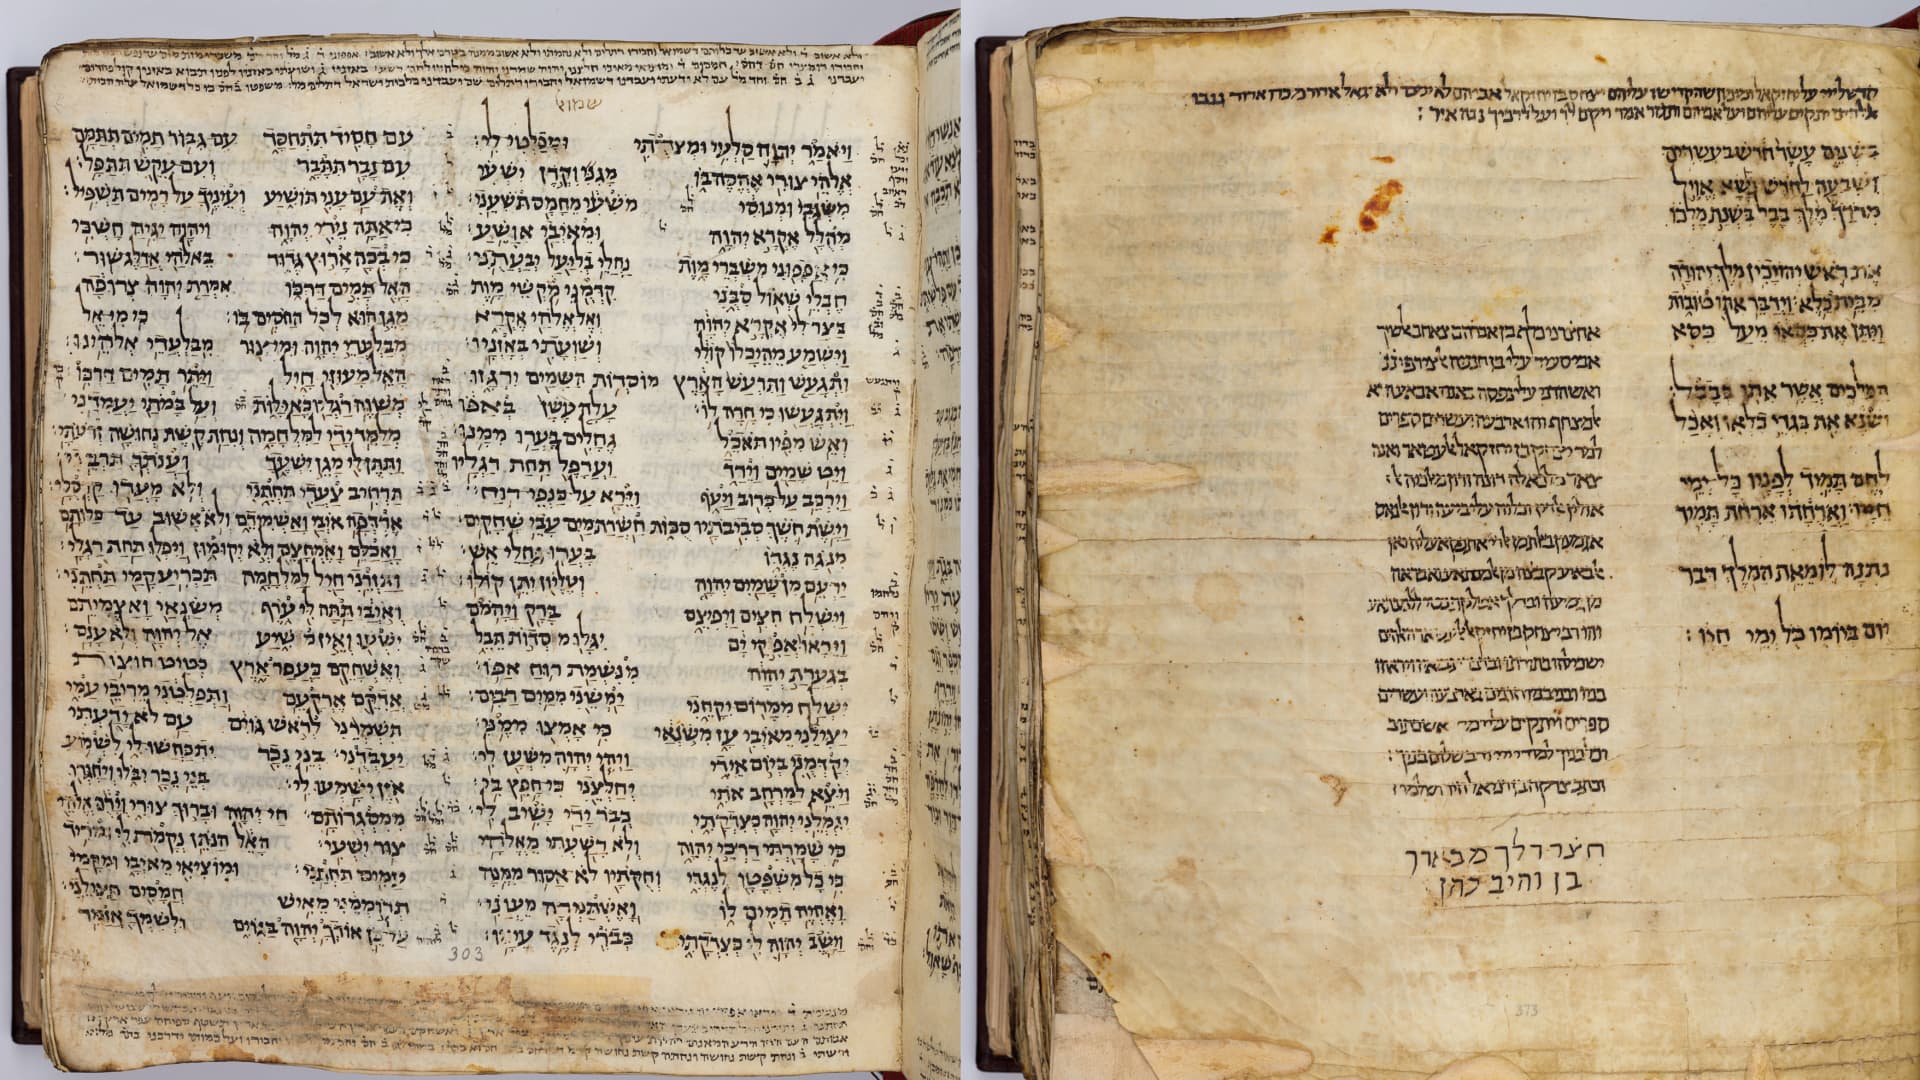 World’s oldest Hebrew Bible could fetch $50 million at auction